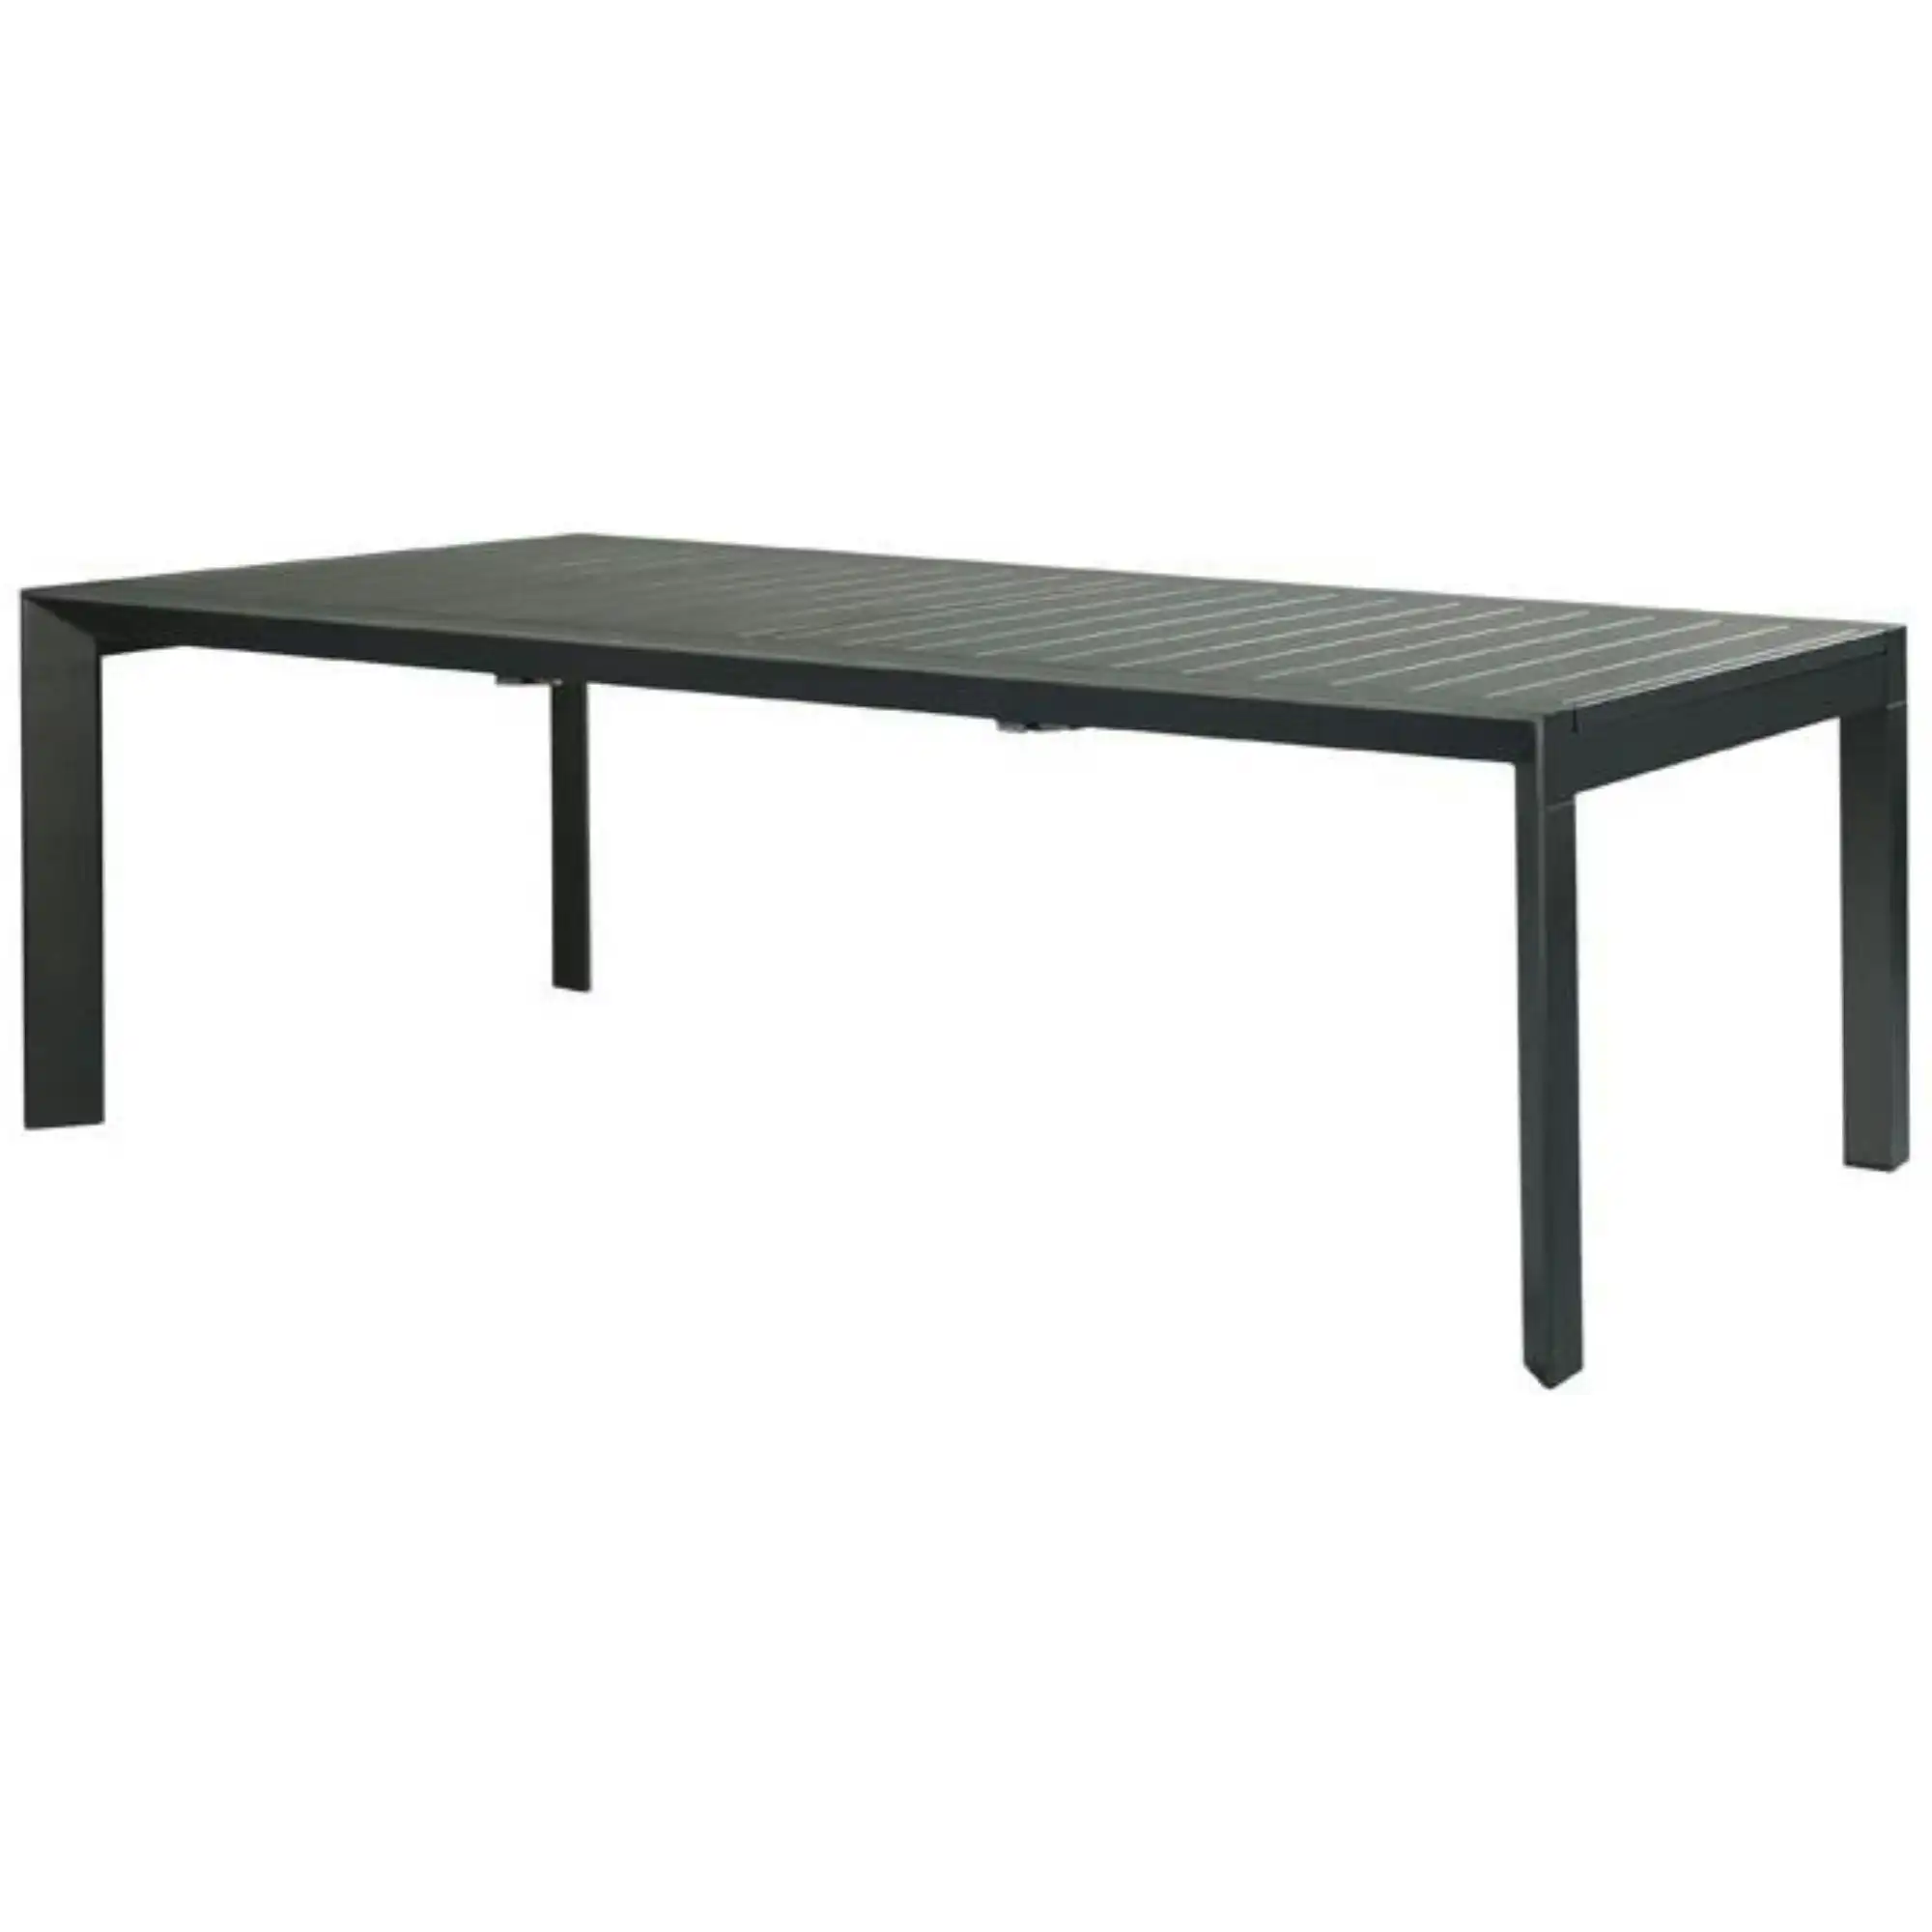 Iberia 230-345cm Outdoor Extensible Dining Table